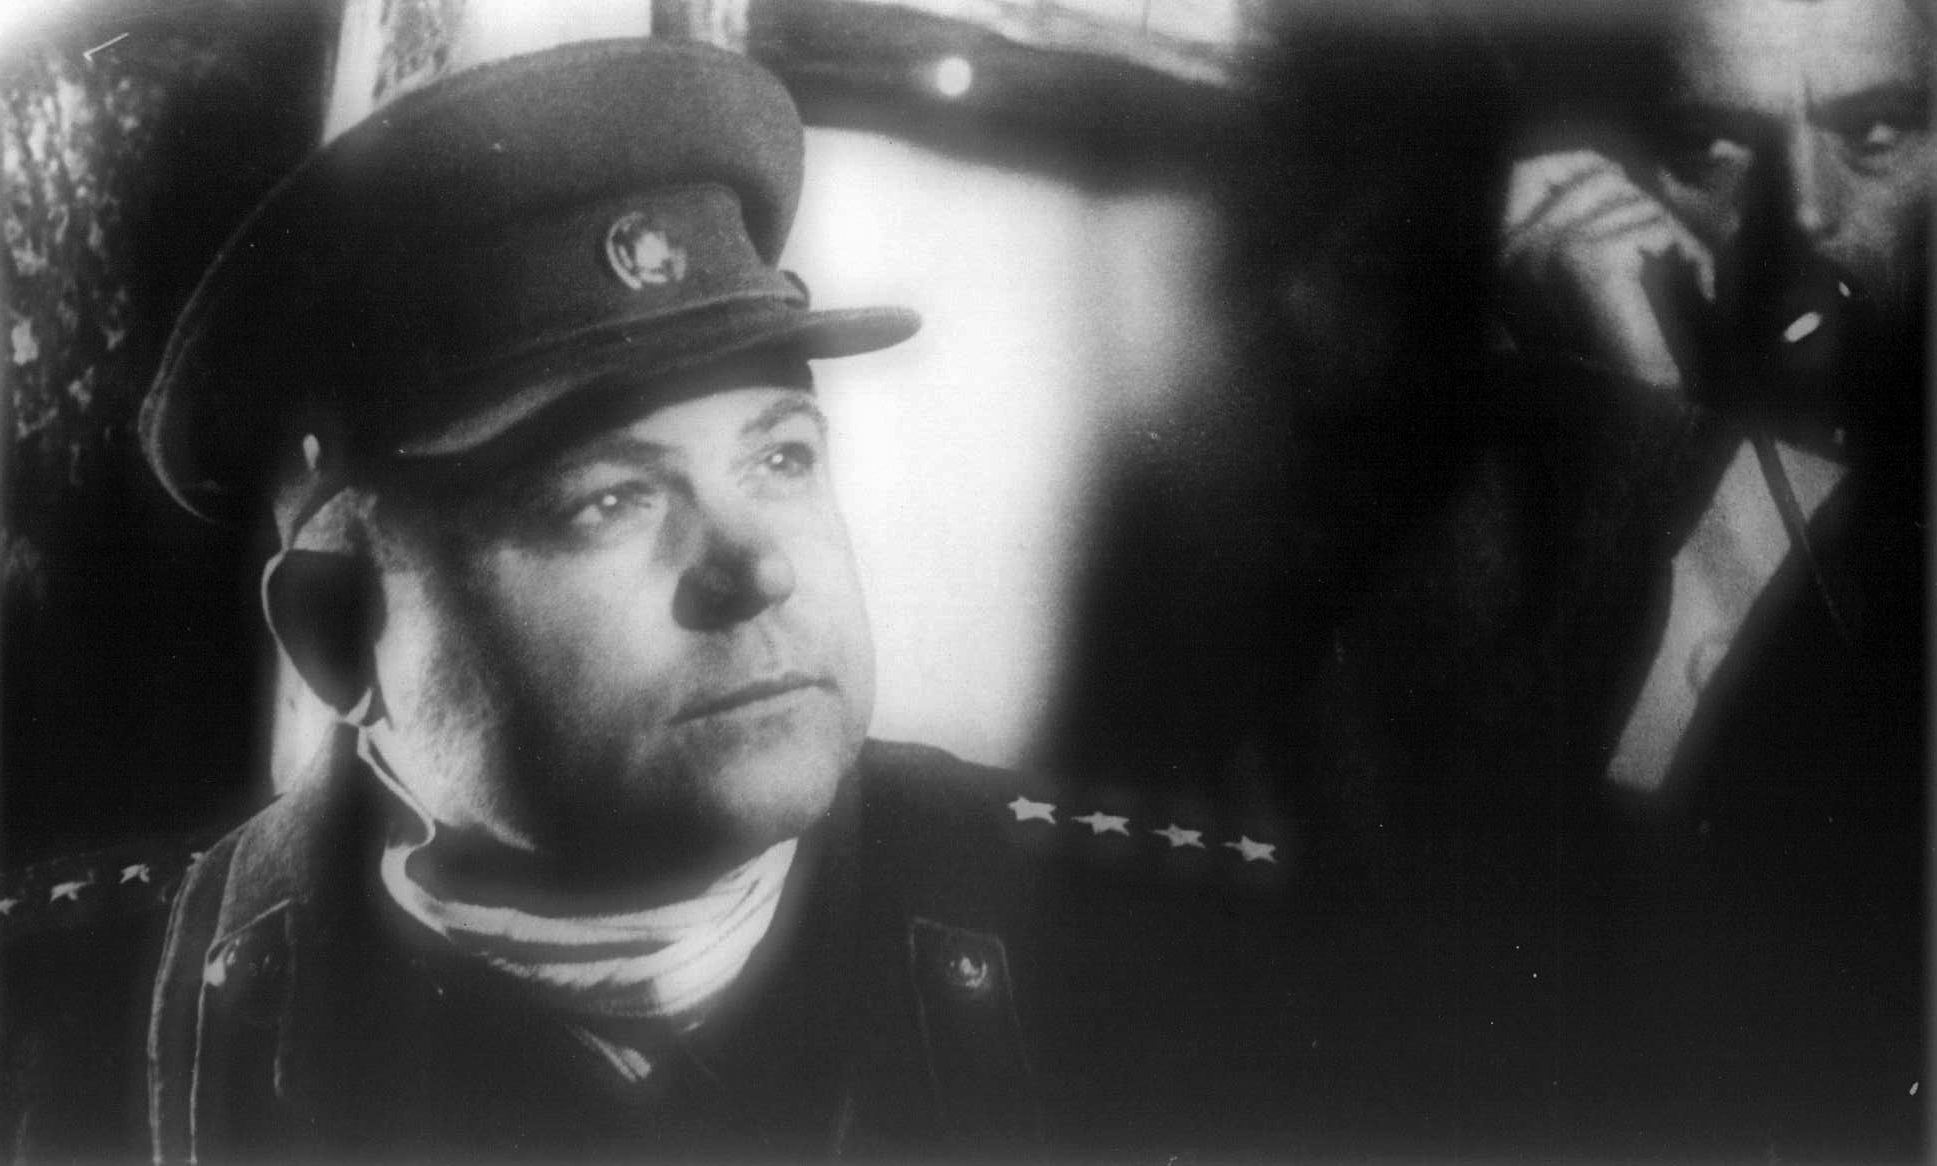 General Nikolai Vatutin commanded the Soviet Red Army’s South West Front during the fighting in the winter of 1942, which included Operation Gallop. 